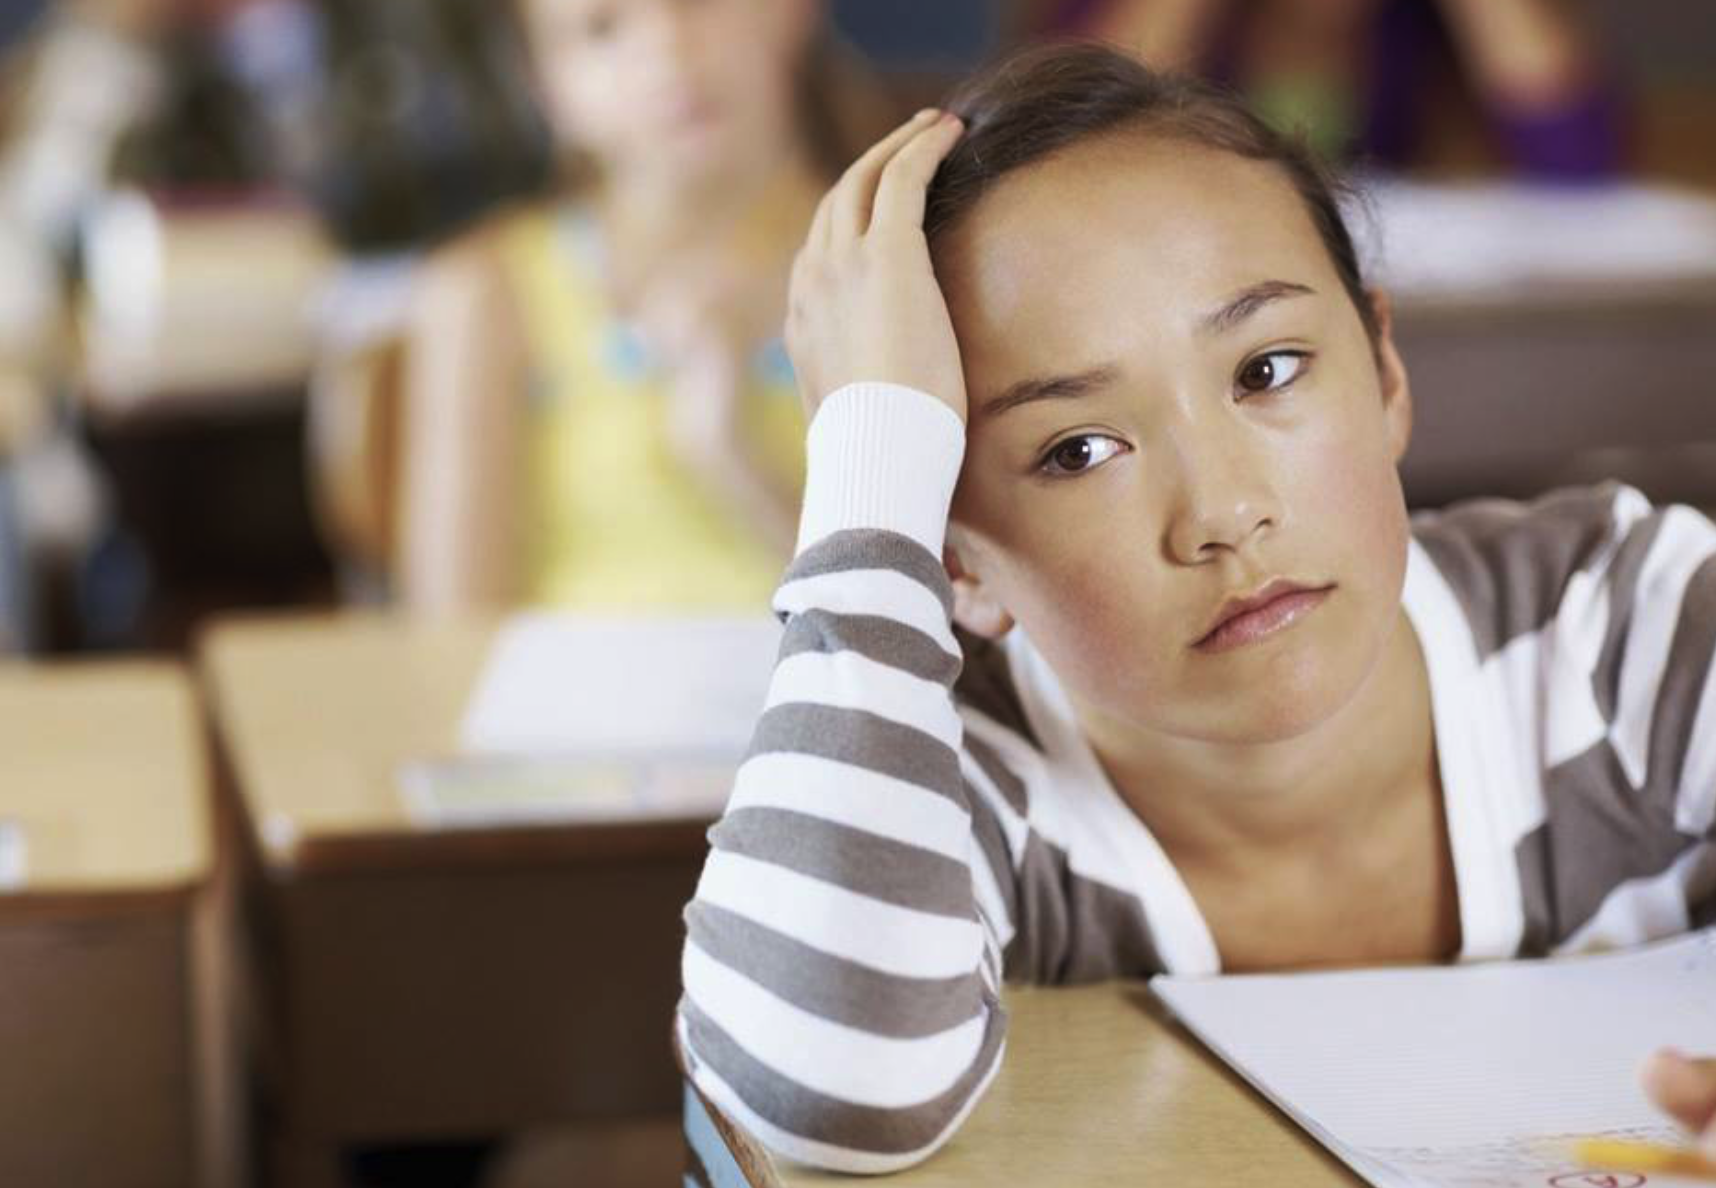 How To Motivate Unmotivated Students
